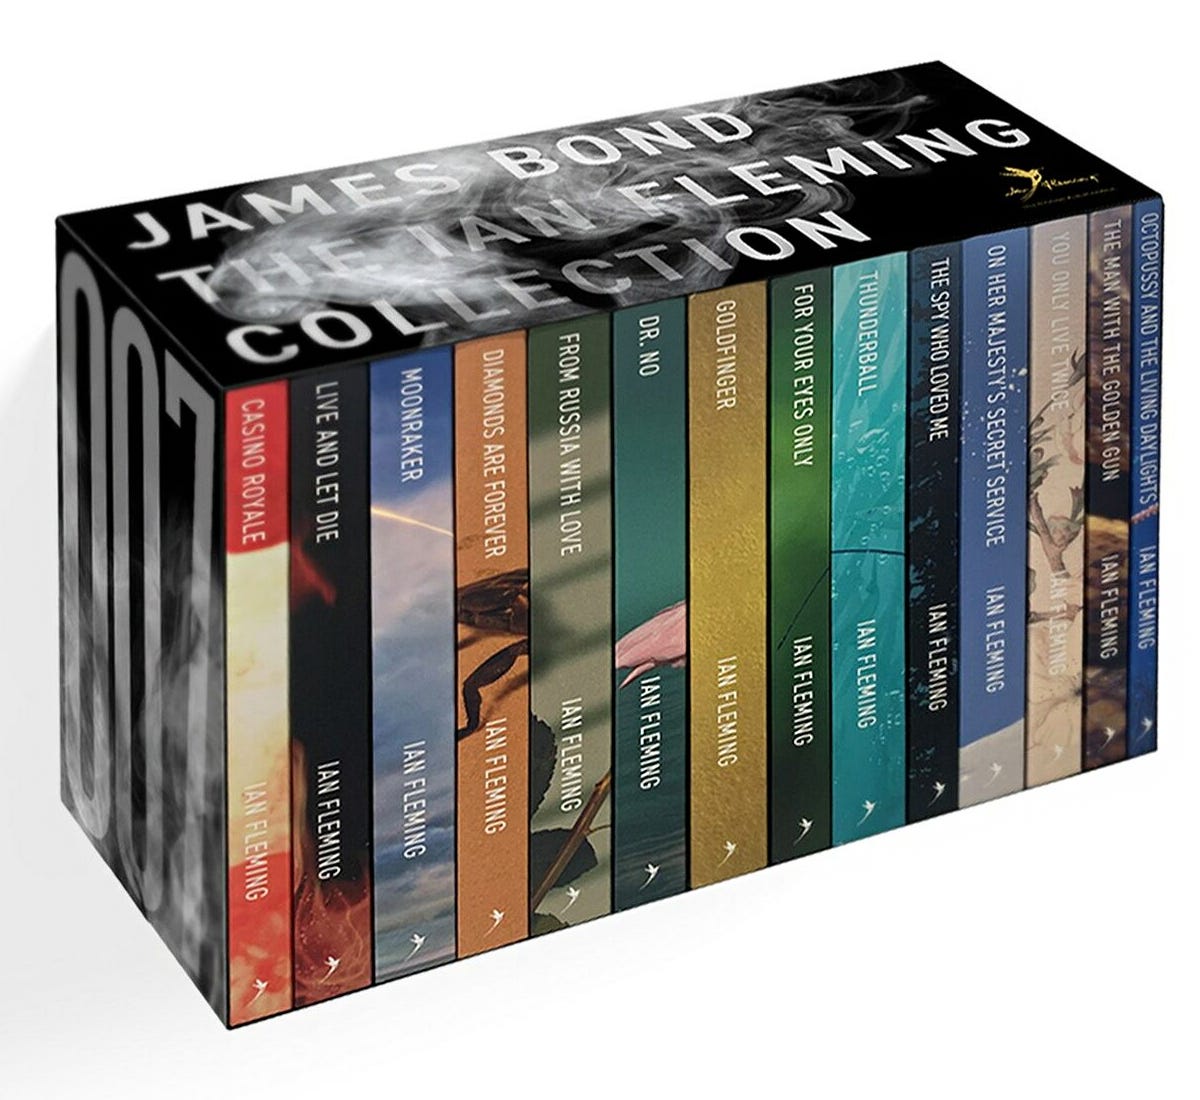 James Bond The Complete Ian Fleming Collection